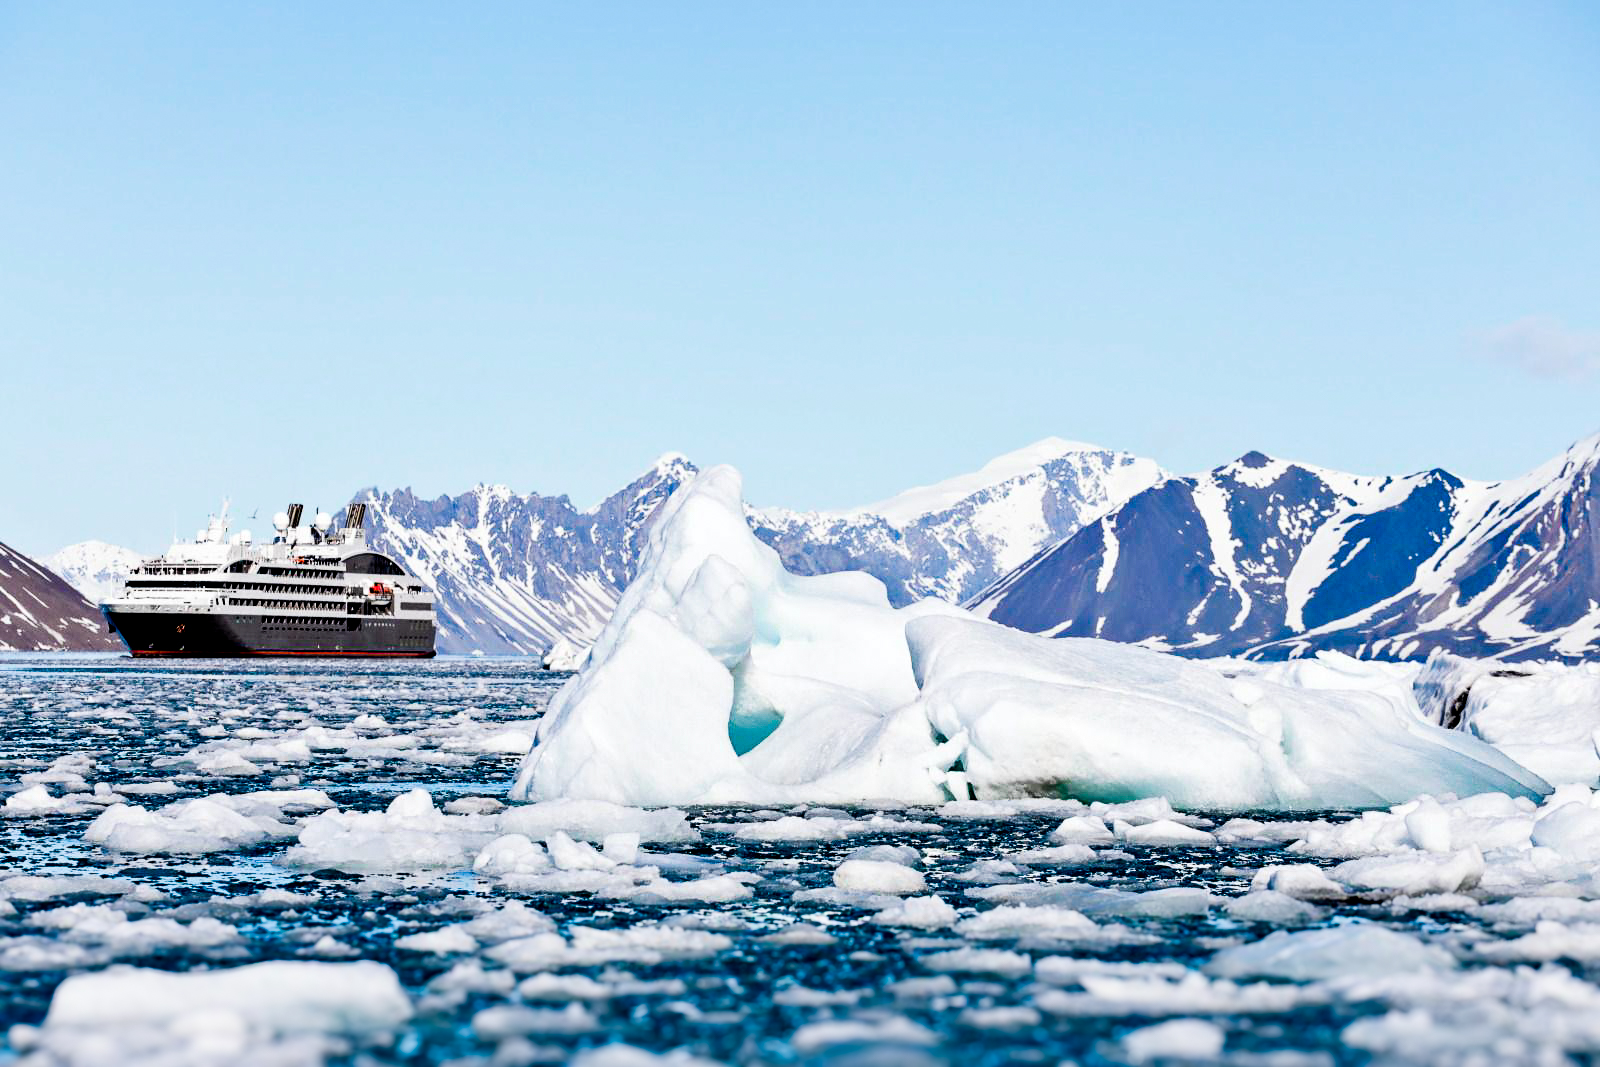 Exterior view of Ponant's Le Boreal cruise ship navigating Arctic waters